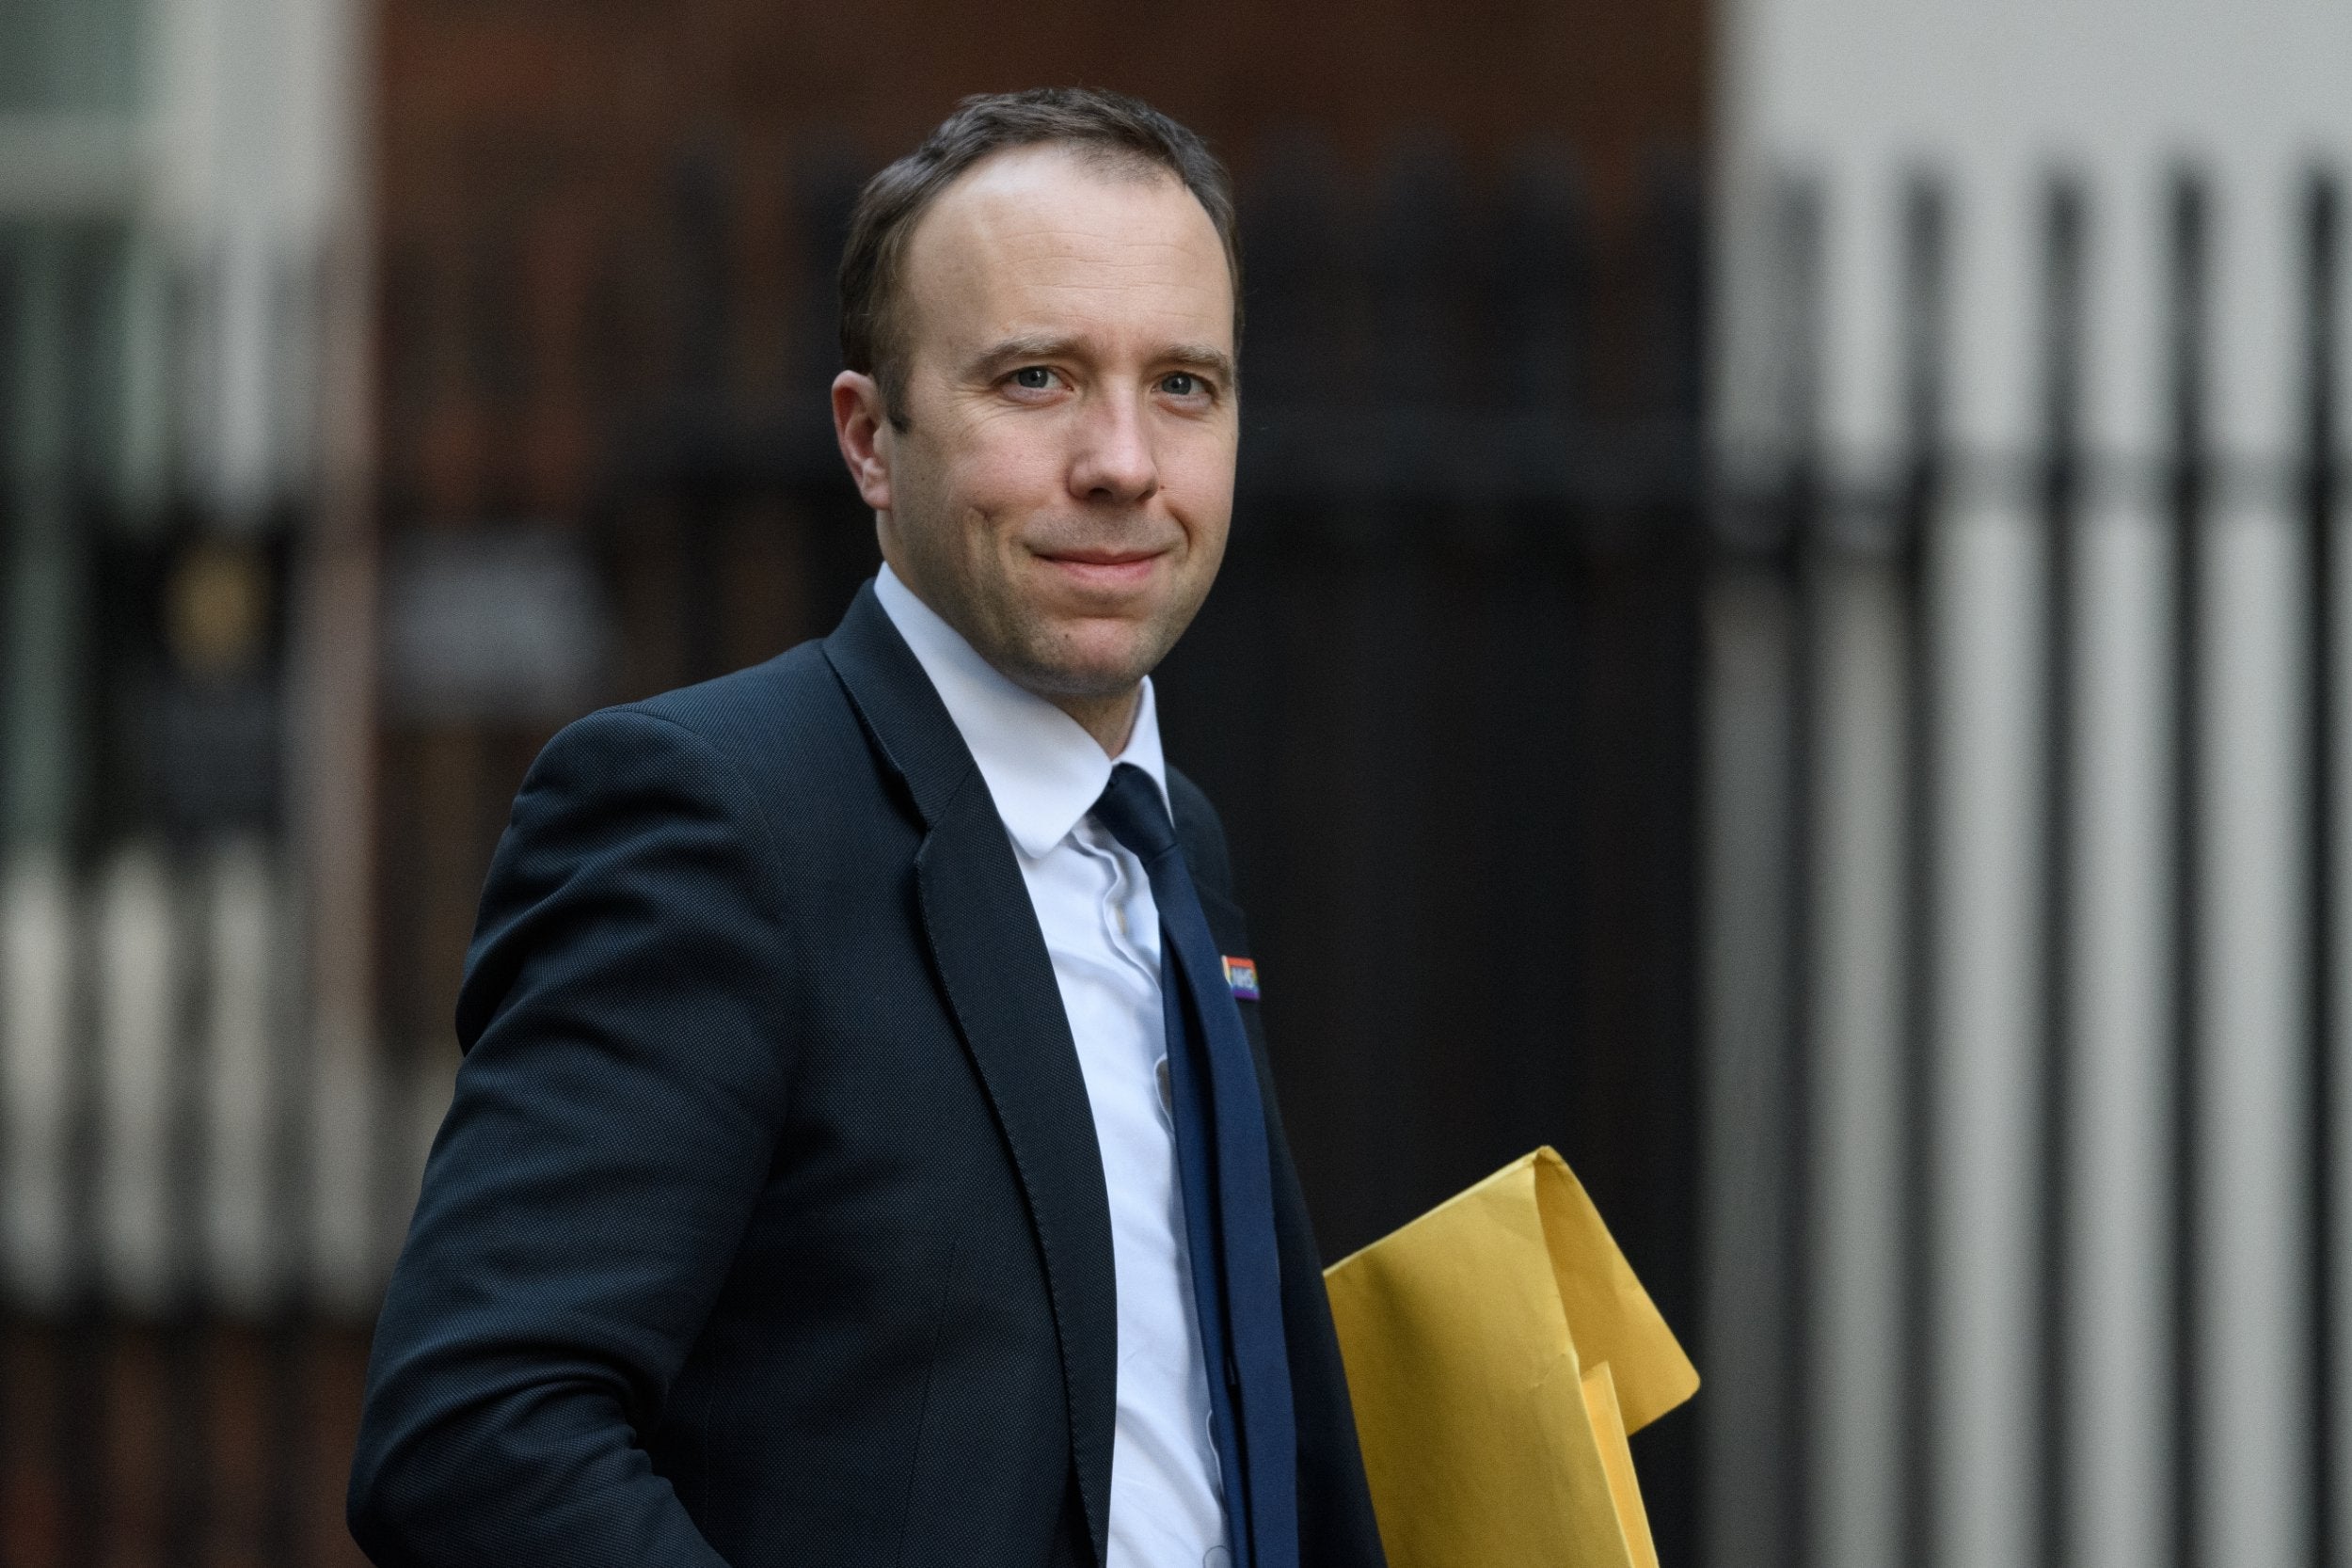 Health secretary Matt Hancock should bring forth the much-delayed social care green paper to relieve pressures on budgets